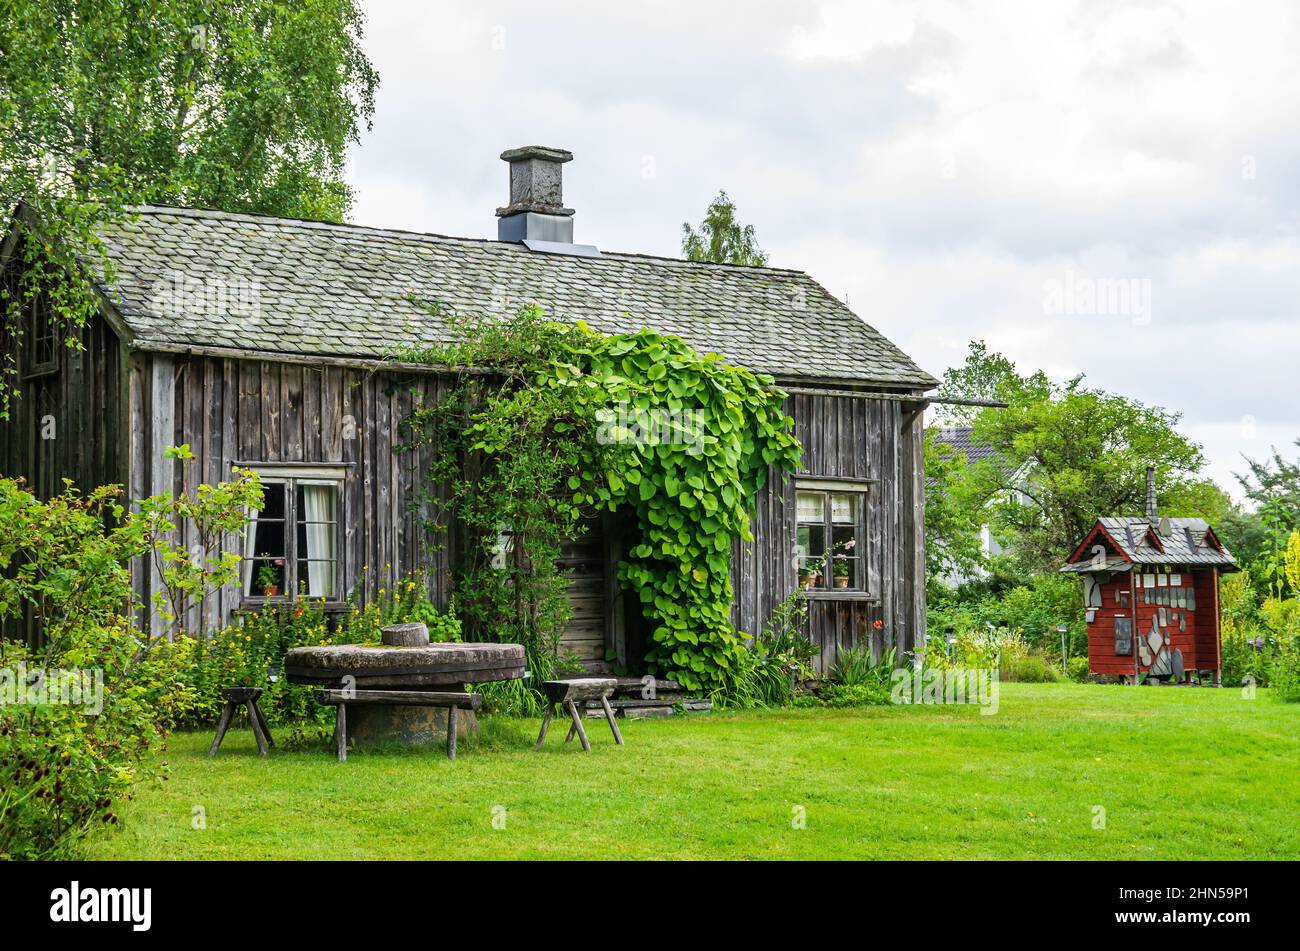 Dals Rostock, Dalsland, Västra Götalands län, Sweden: The picturesque herb garden with Kroppefjäll's museum of local history and a small café. Stock Photo